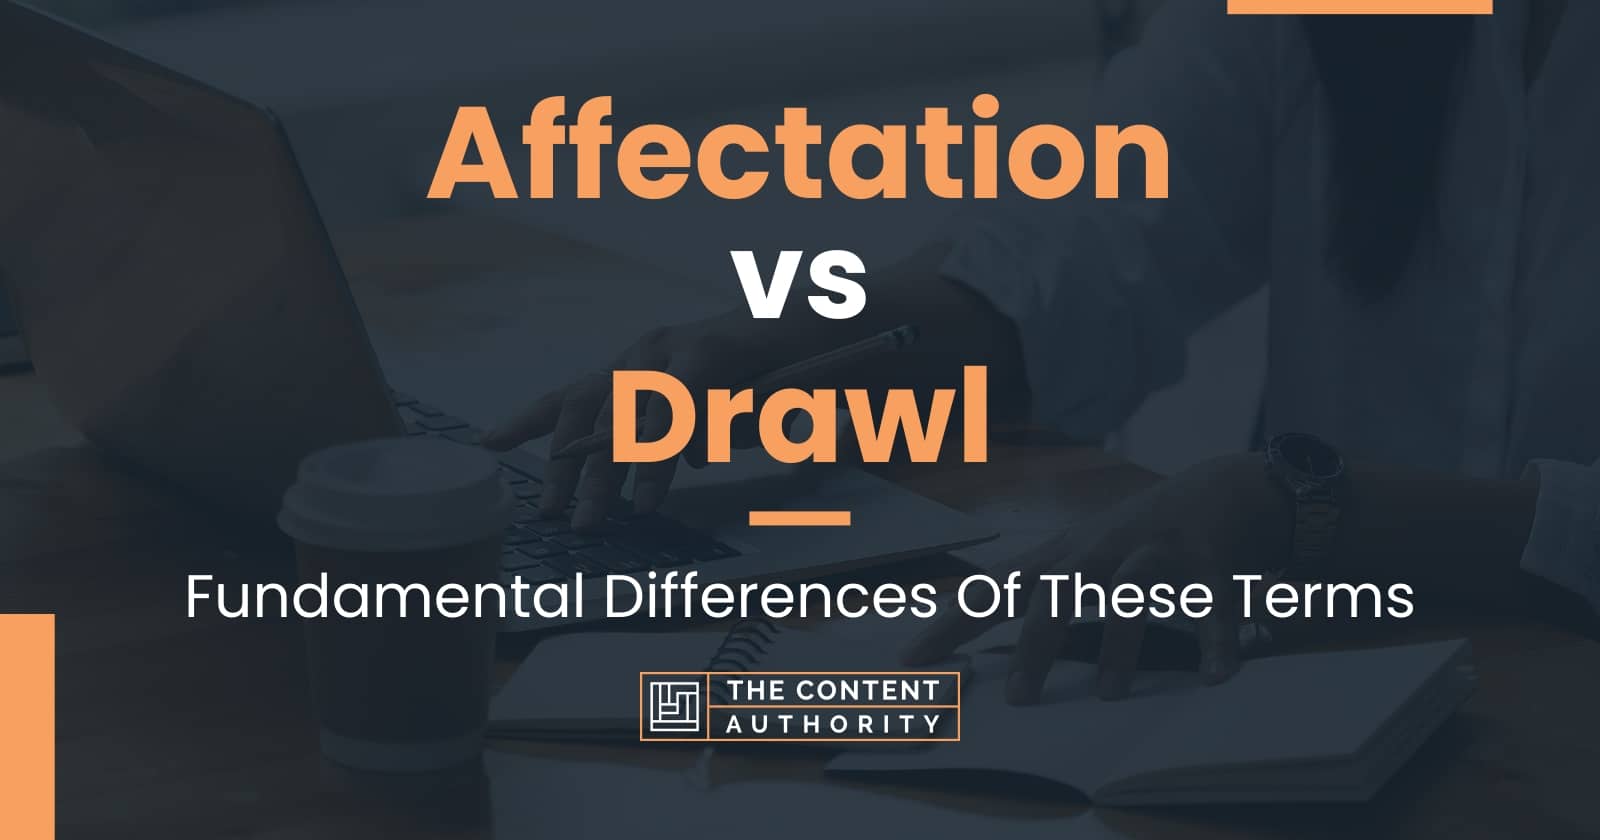 Affectation vs Drawl Fundamental Differences Of These Terms